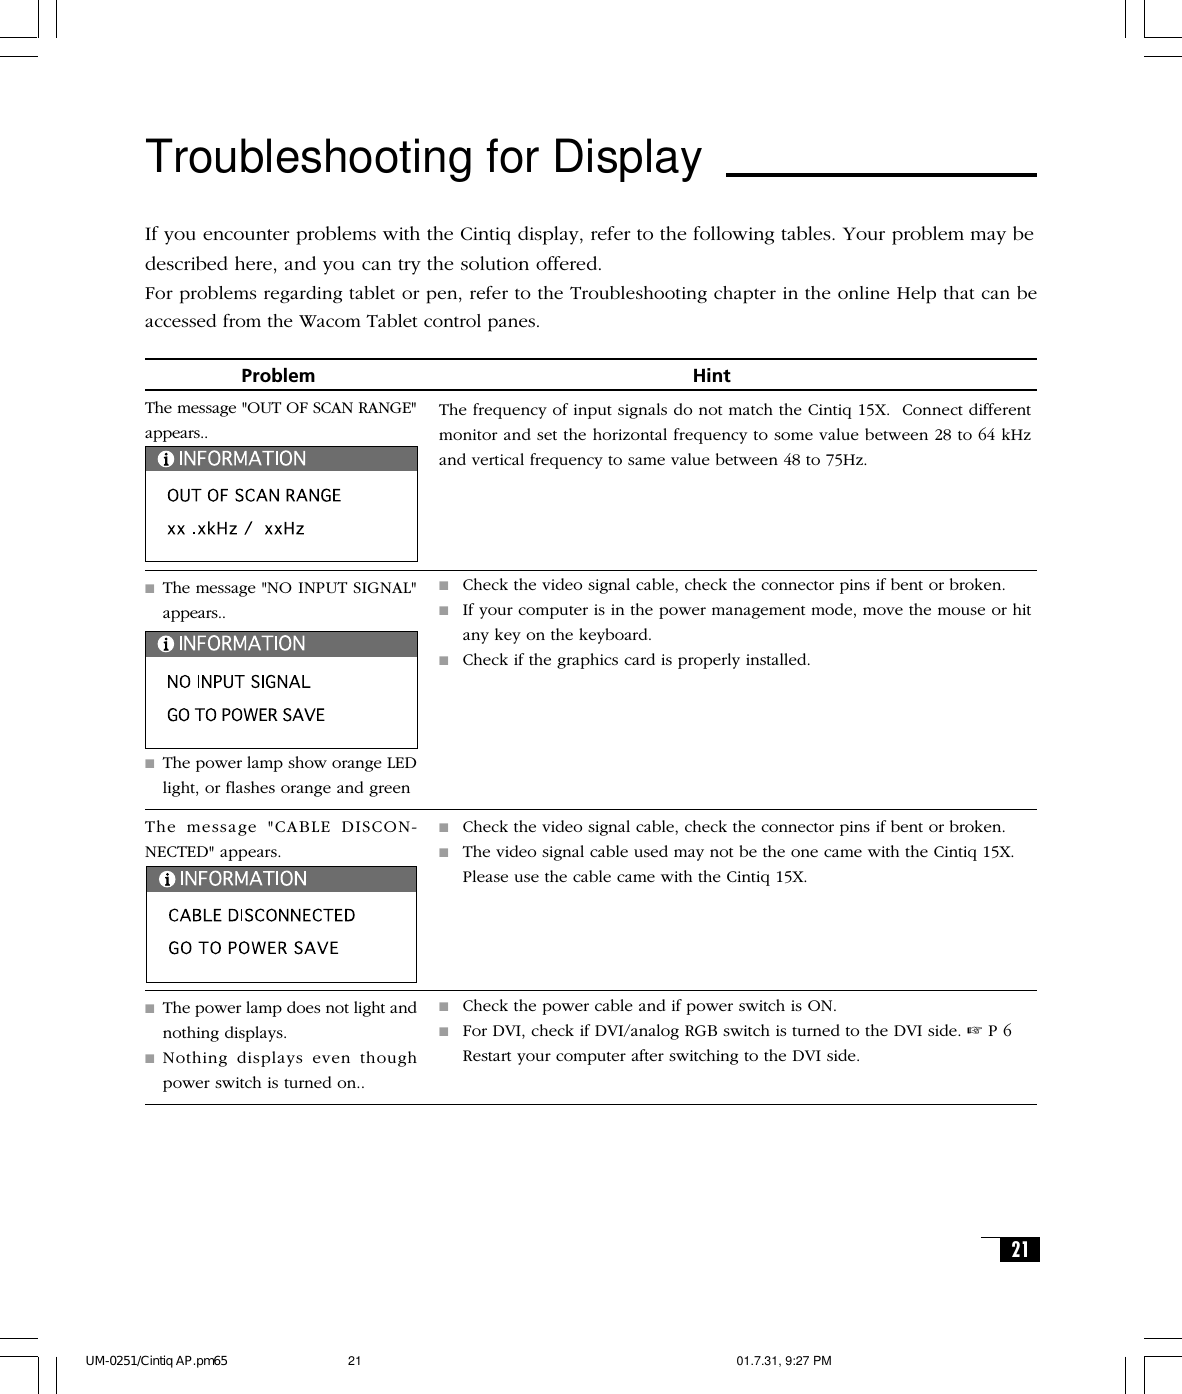 21Troubleshooting for DisplayIf you encounter problems with the Cintiq display, refer to the following tables. Your problem may bedescribed here, and you can try the solution offered.For problems regarding tablet or pen, refer to the Troubleshooting chapter in the online Help that can beaccessed from the Wacom Tablet control panes.       Problem               HintThe message &quot;OUT OF SCAN RANGE&quot;appears..■The message &quot;NO INPUT SIGNAL&quot;appears..■The power lamp show orange LEDlight, or flashes orange and greenThe message &quot;CABLE DISCON-NECTED&quot; appears.■The power lamp does not light andnothing displays.■Nothing displays even thoughpower switch is turned on..The frequency of input signals do not match the Cintiq 15X.  Connect differentmonitor and set the horizontal frequency to some value between 28 to 64 kHzand vertical frequency to same value between 48 to 75Hz.■Check the video signal cable, check the connector pins if bent or broken.■If your computer is in the power management mode, move the mouse or hitany key on the keyboard.■Check if the graphics card is properly installed.■Check the video signal cable, check the connector pins if bent or broken.■The video signal cable used may not be the one came with the Cintiq 15X.Please use the cable came with the Cintiq 15X.■Check the power cable and if power switch is ON.■For DVI, check if DVI/analog RGB switch is turned to the DVI side. ☞ P 6Restart your computer after switching to the DVI side.UM-0251/Cintiq AP.pm65 01.7.31, 9:27 PM21